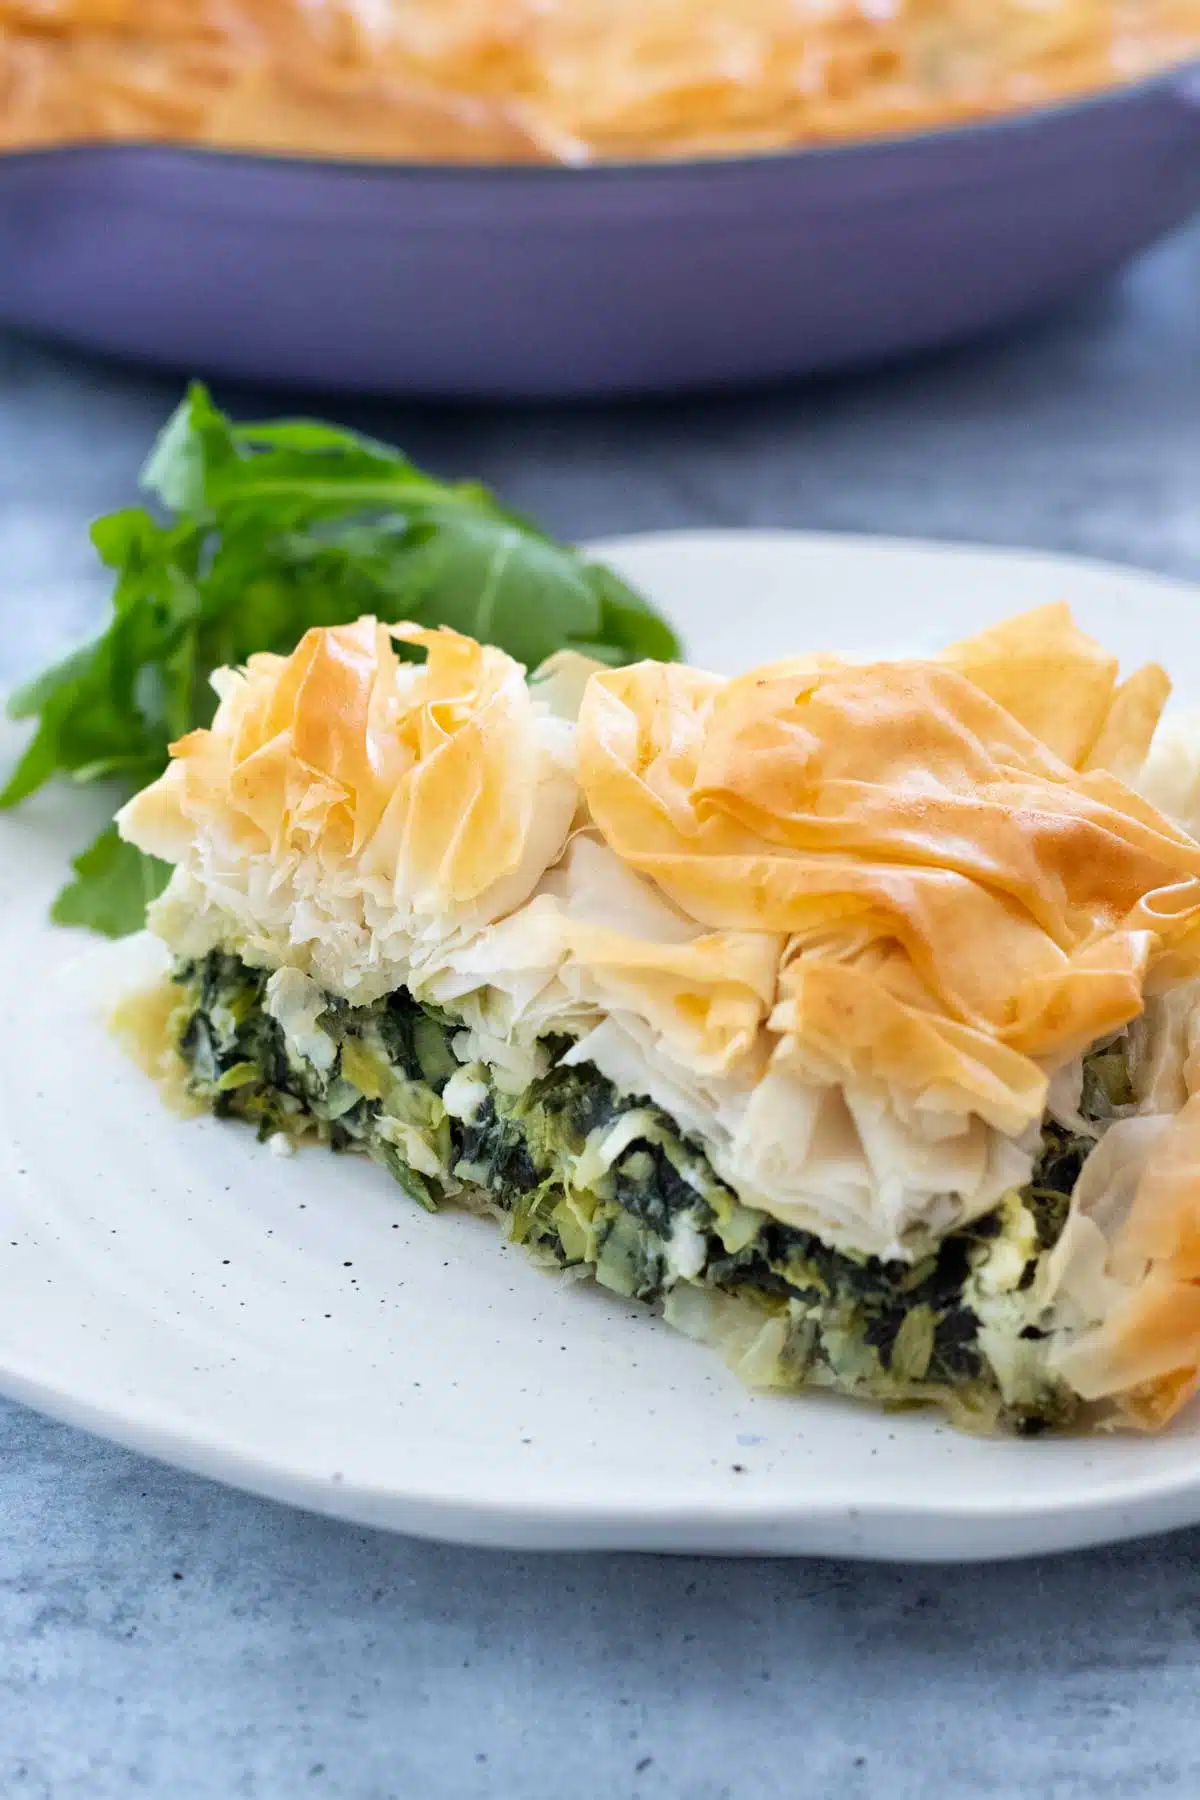 A piece of spanakopita has been cut and put on a white speckled plate with some rocket.